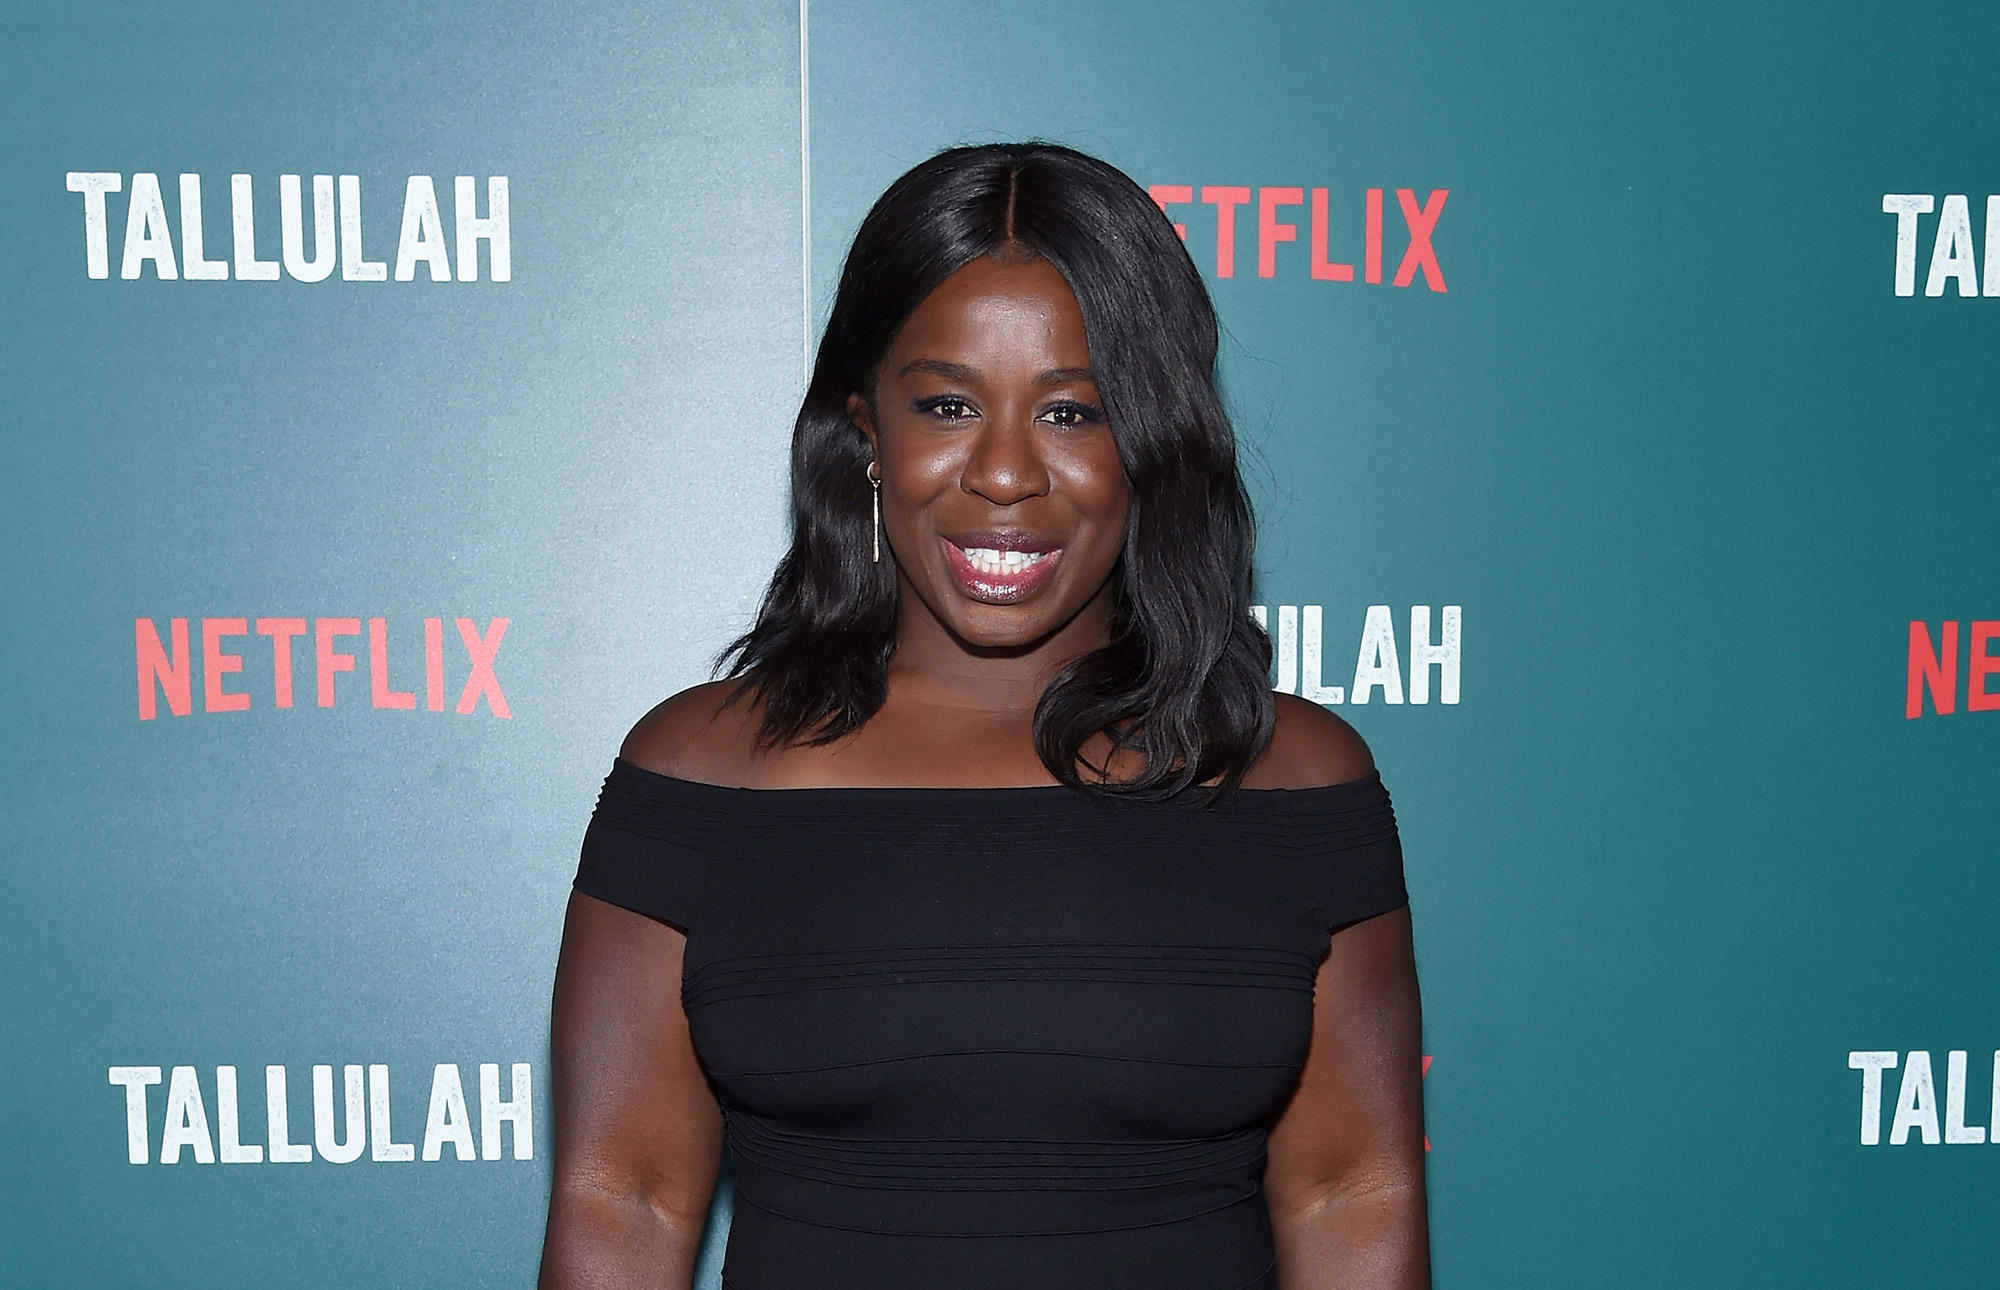 Uzo Aduba attends a special screening of "Tallulah" hosted by Netflix at Landmark Sunshine Cinema on July 19, 2016 in New York City.  (Photo by Jamie McCarthy/Getty Images) (Jamie McCarthy&mdash;Getty Images)